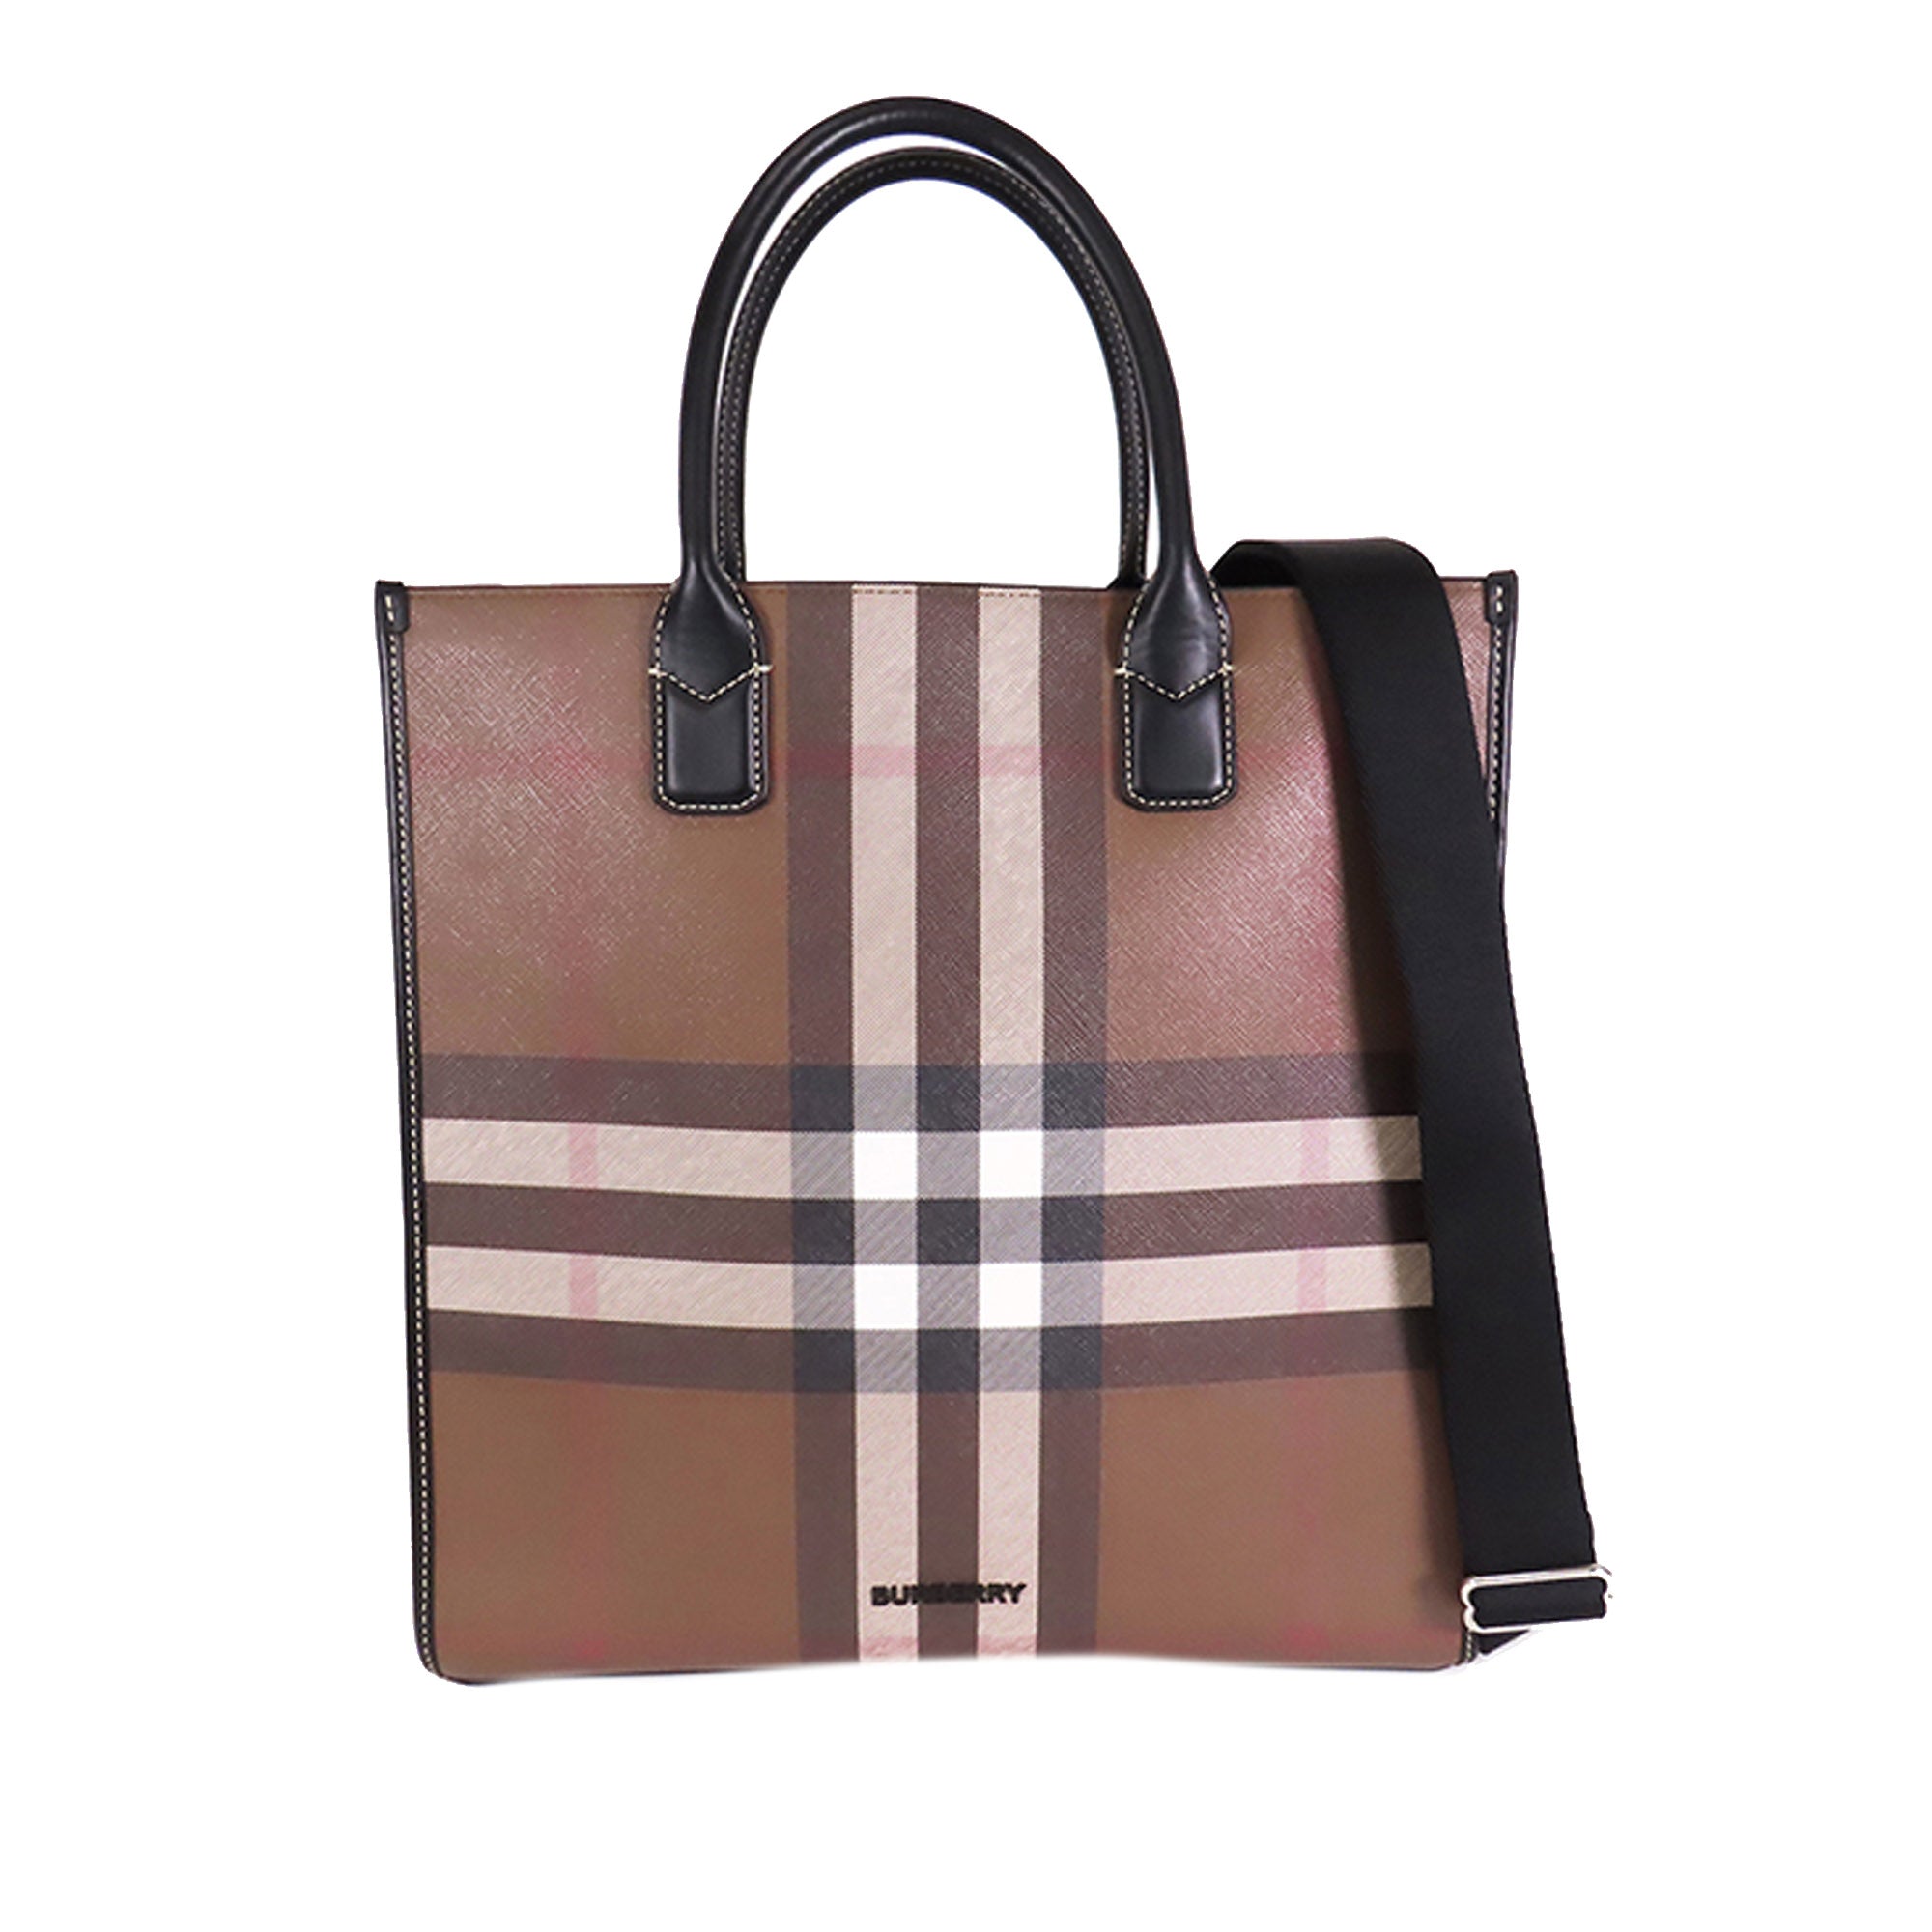 Burberry Medium leather-trimmed canvas tote bag